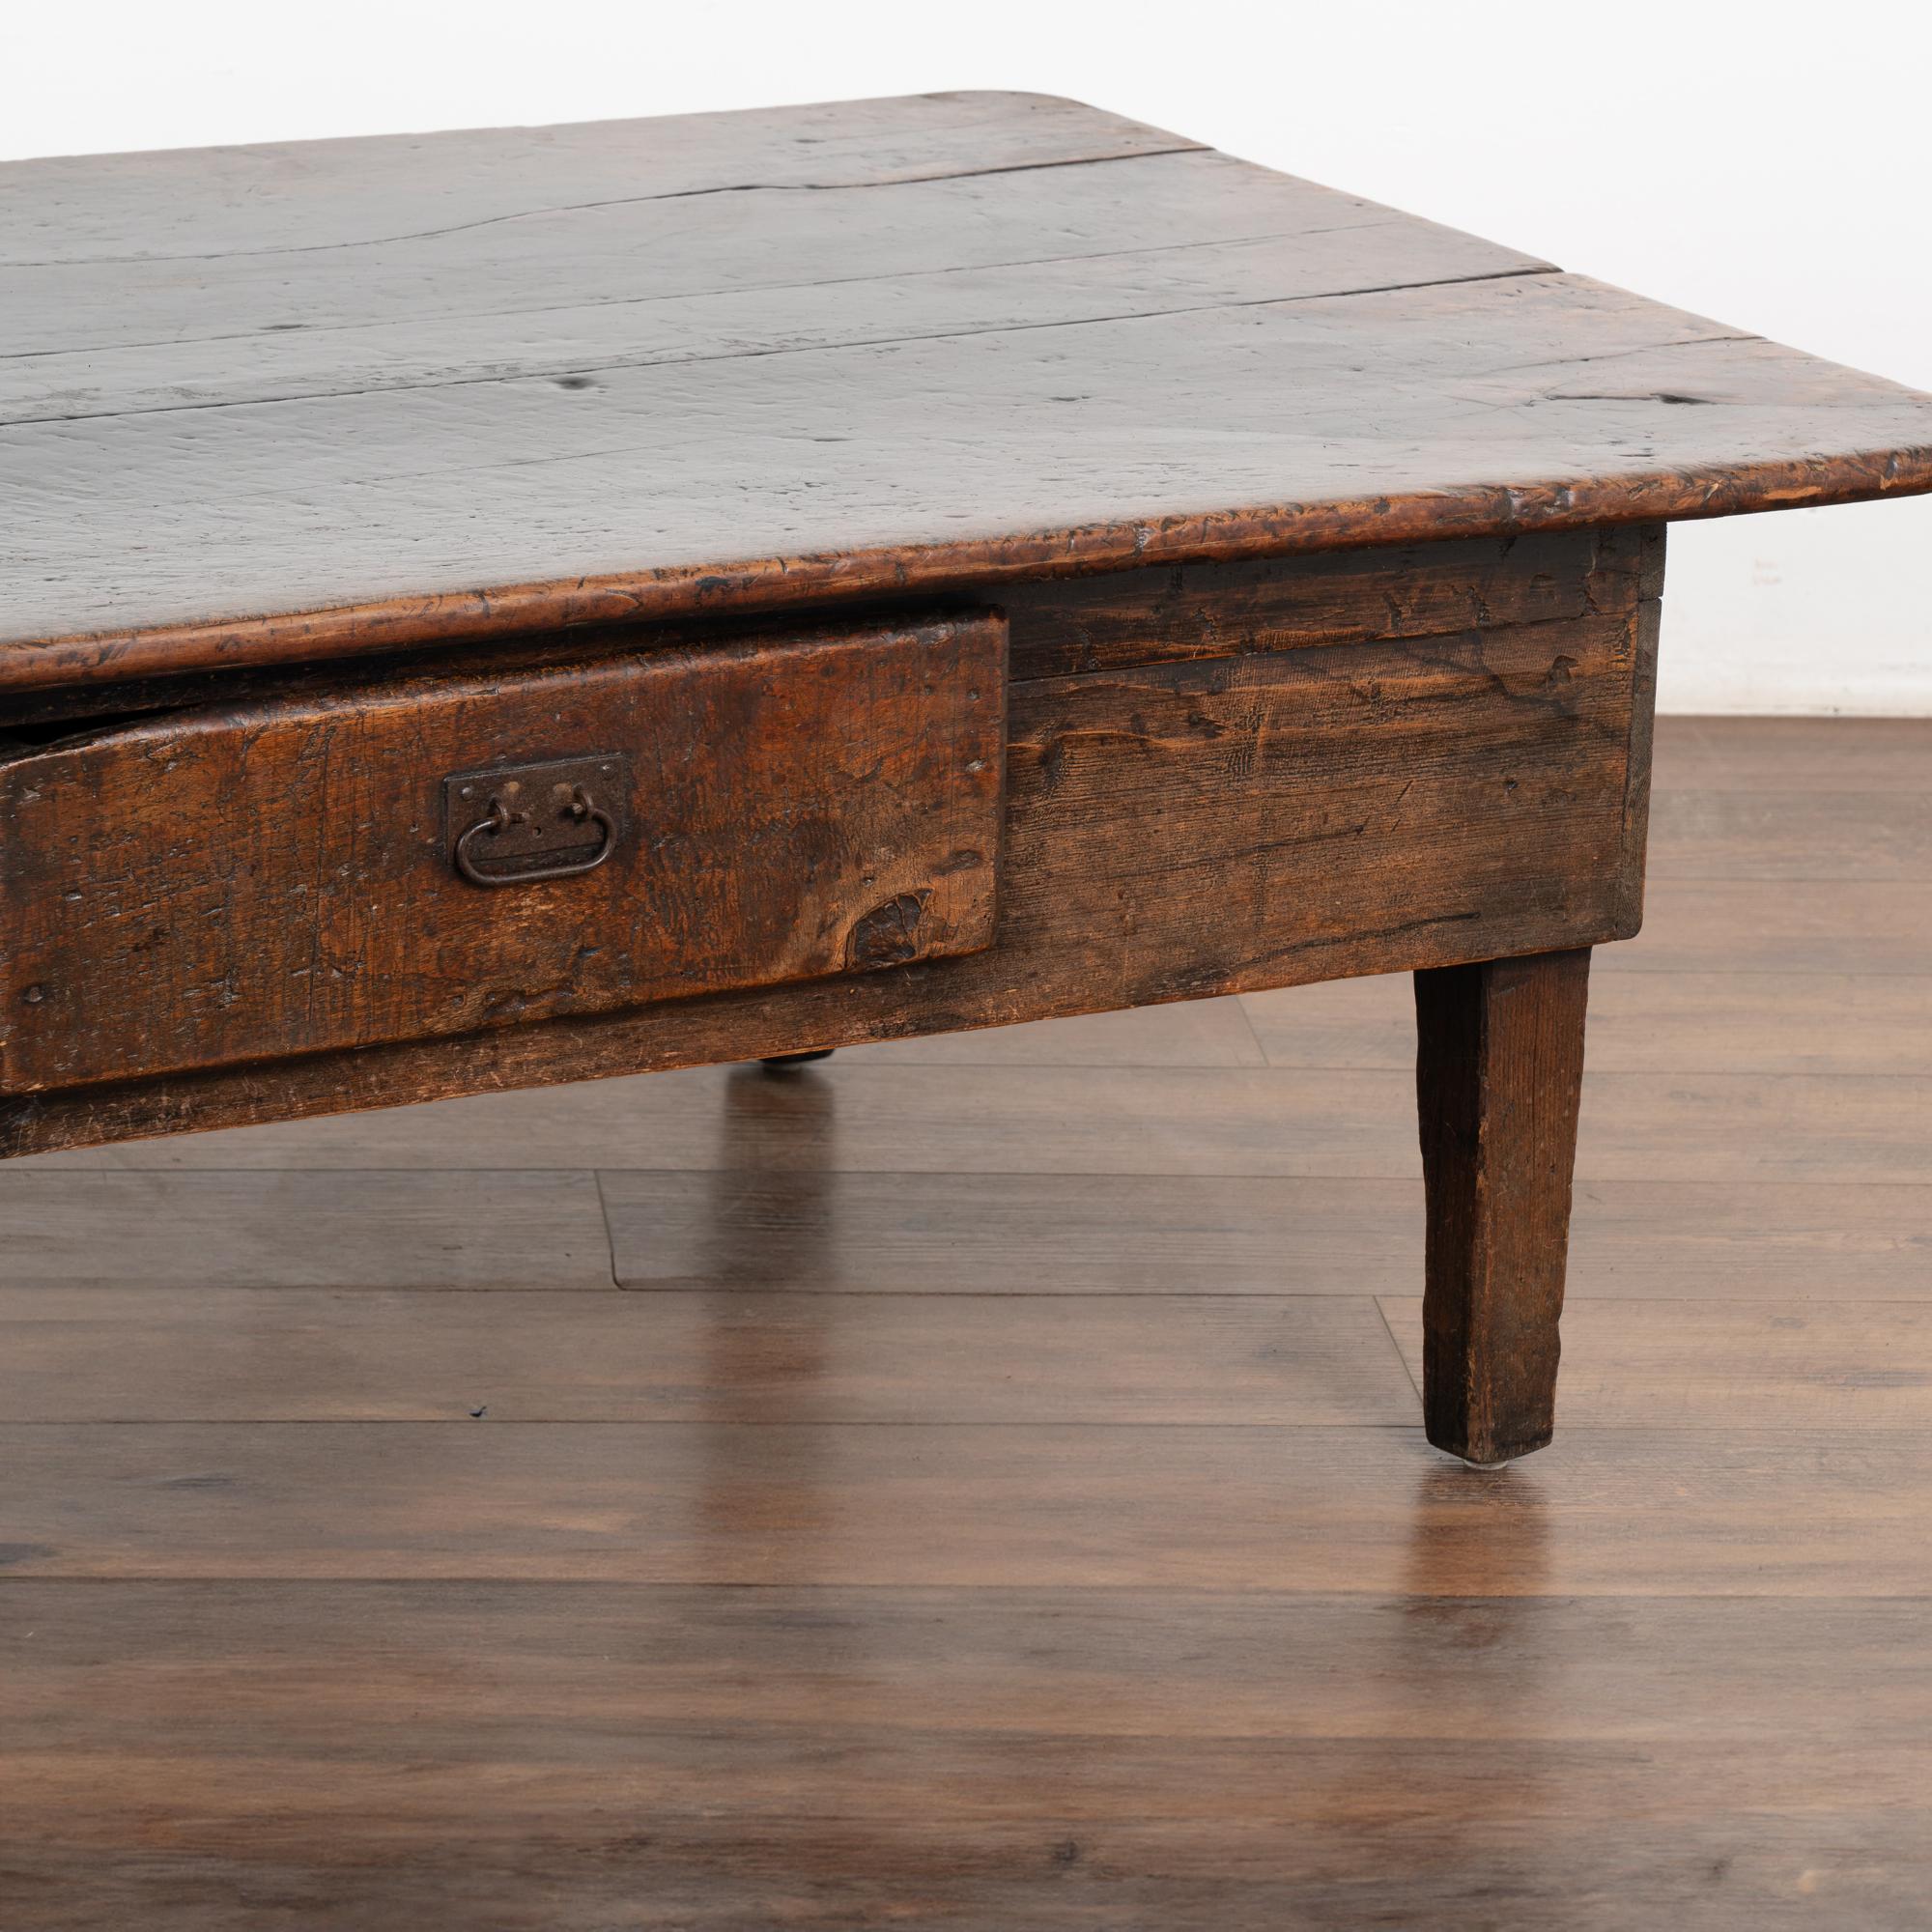 Chestnut French Country Coffee Table With Single Drawer, Circa 1800-40